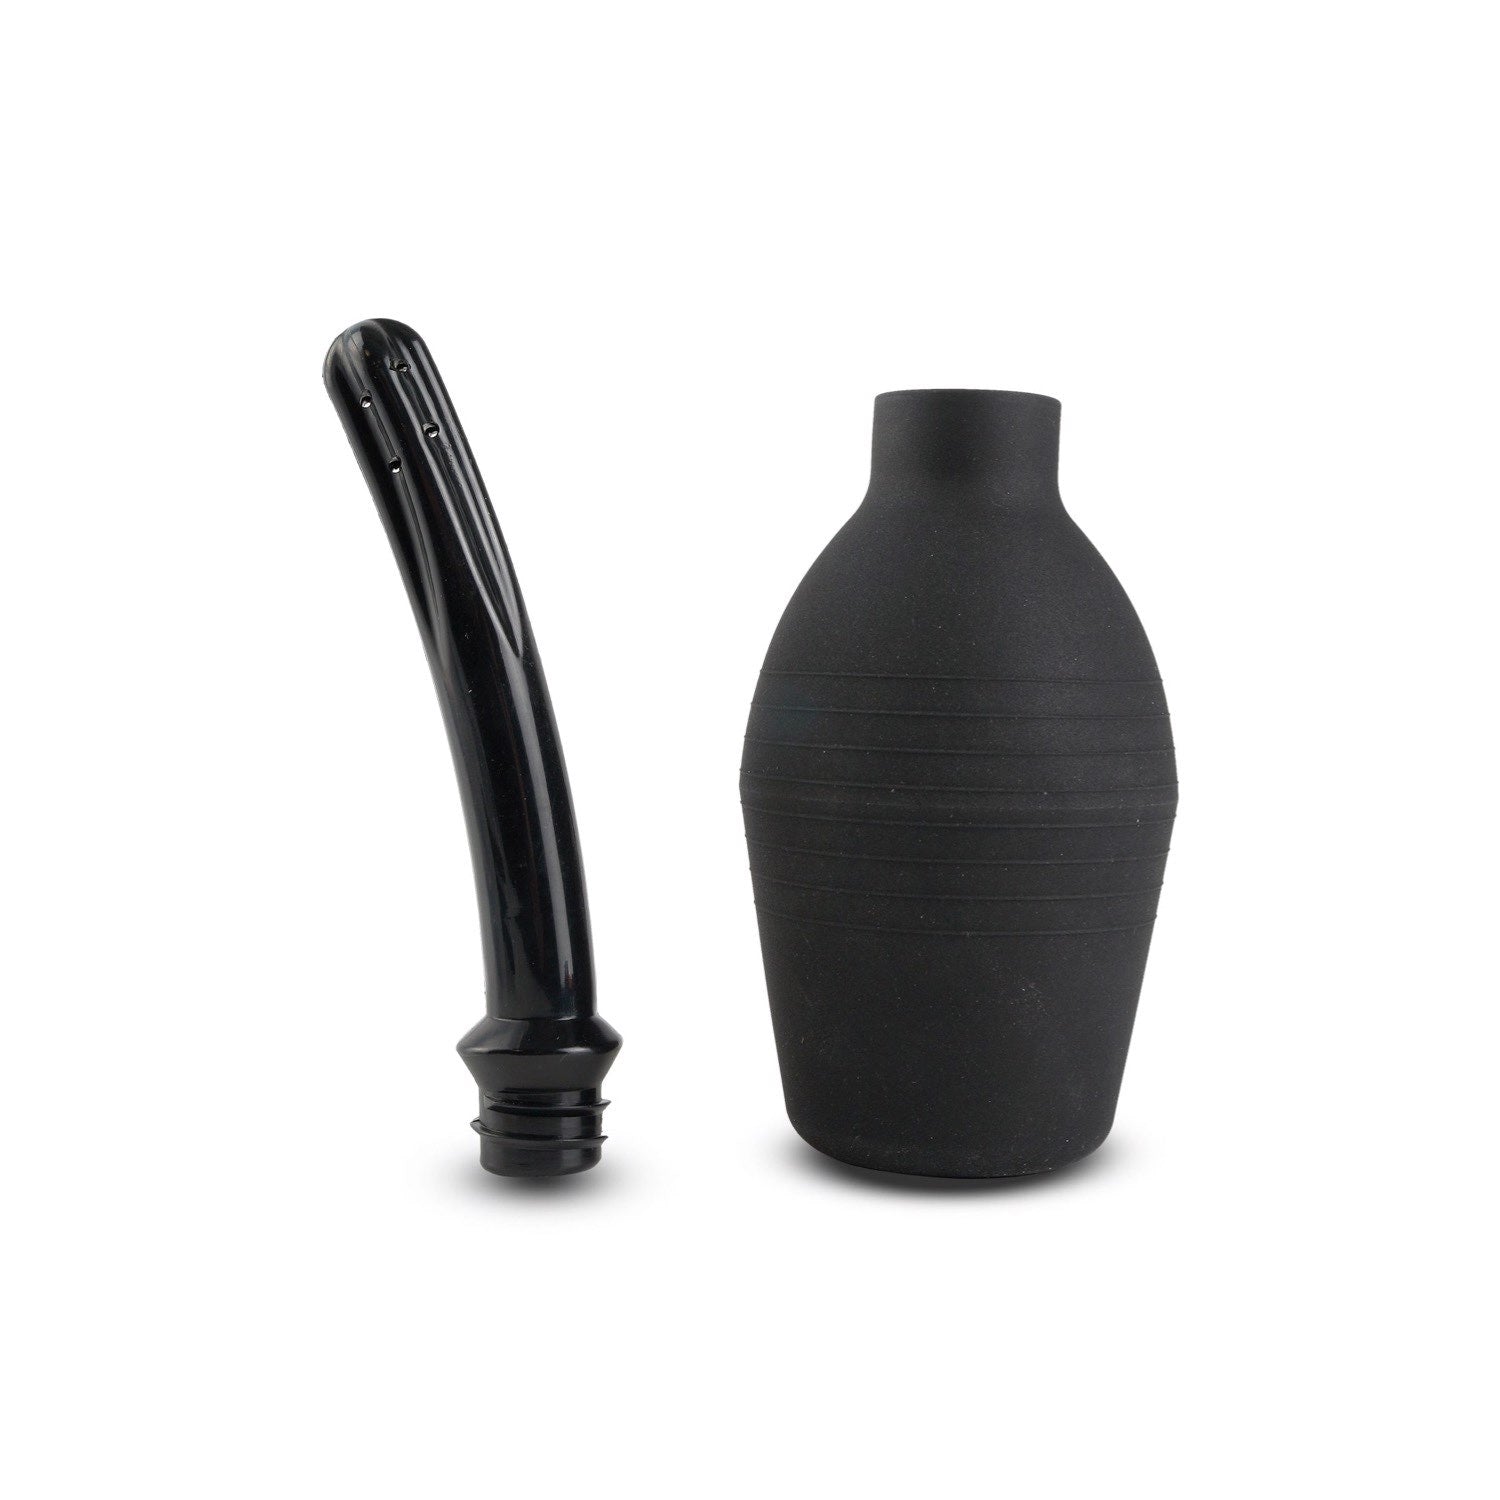 Fetish Fantasy Series Curved Douche/Enema - Black Douche/Enema by Pipedream